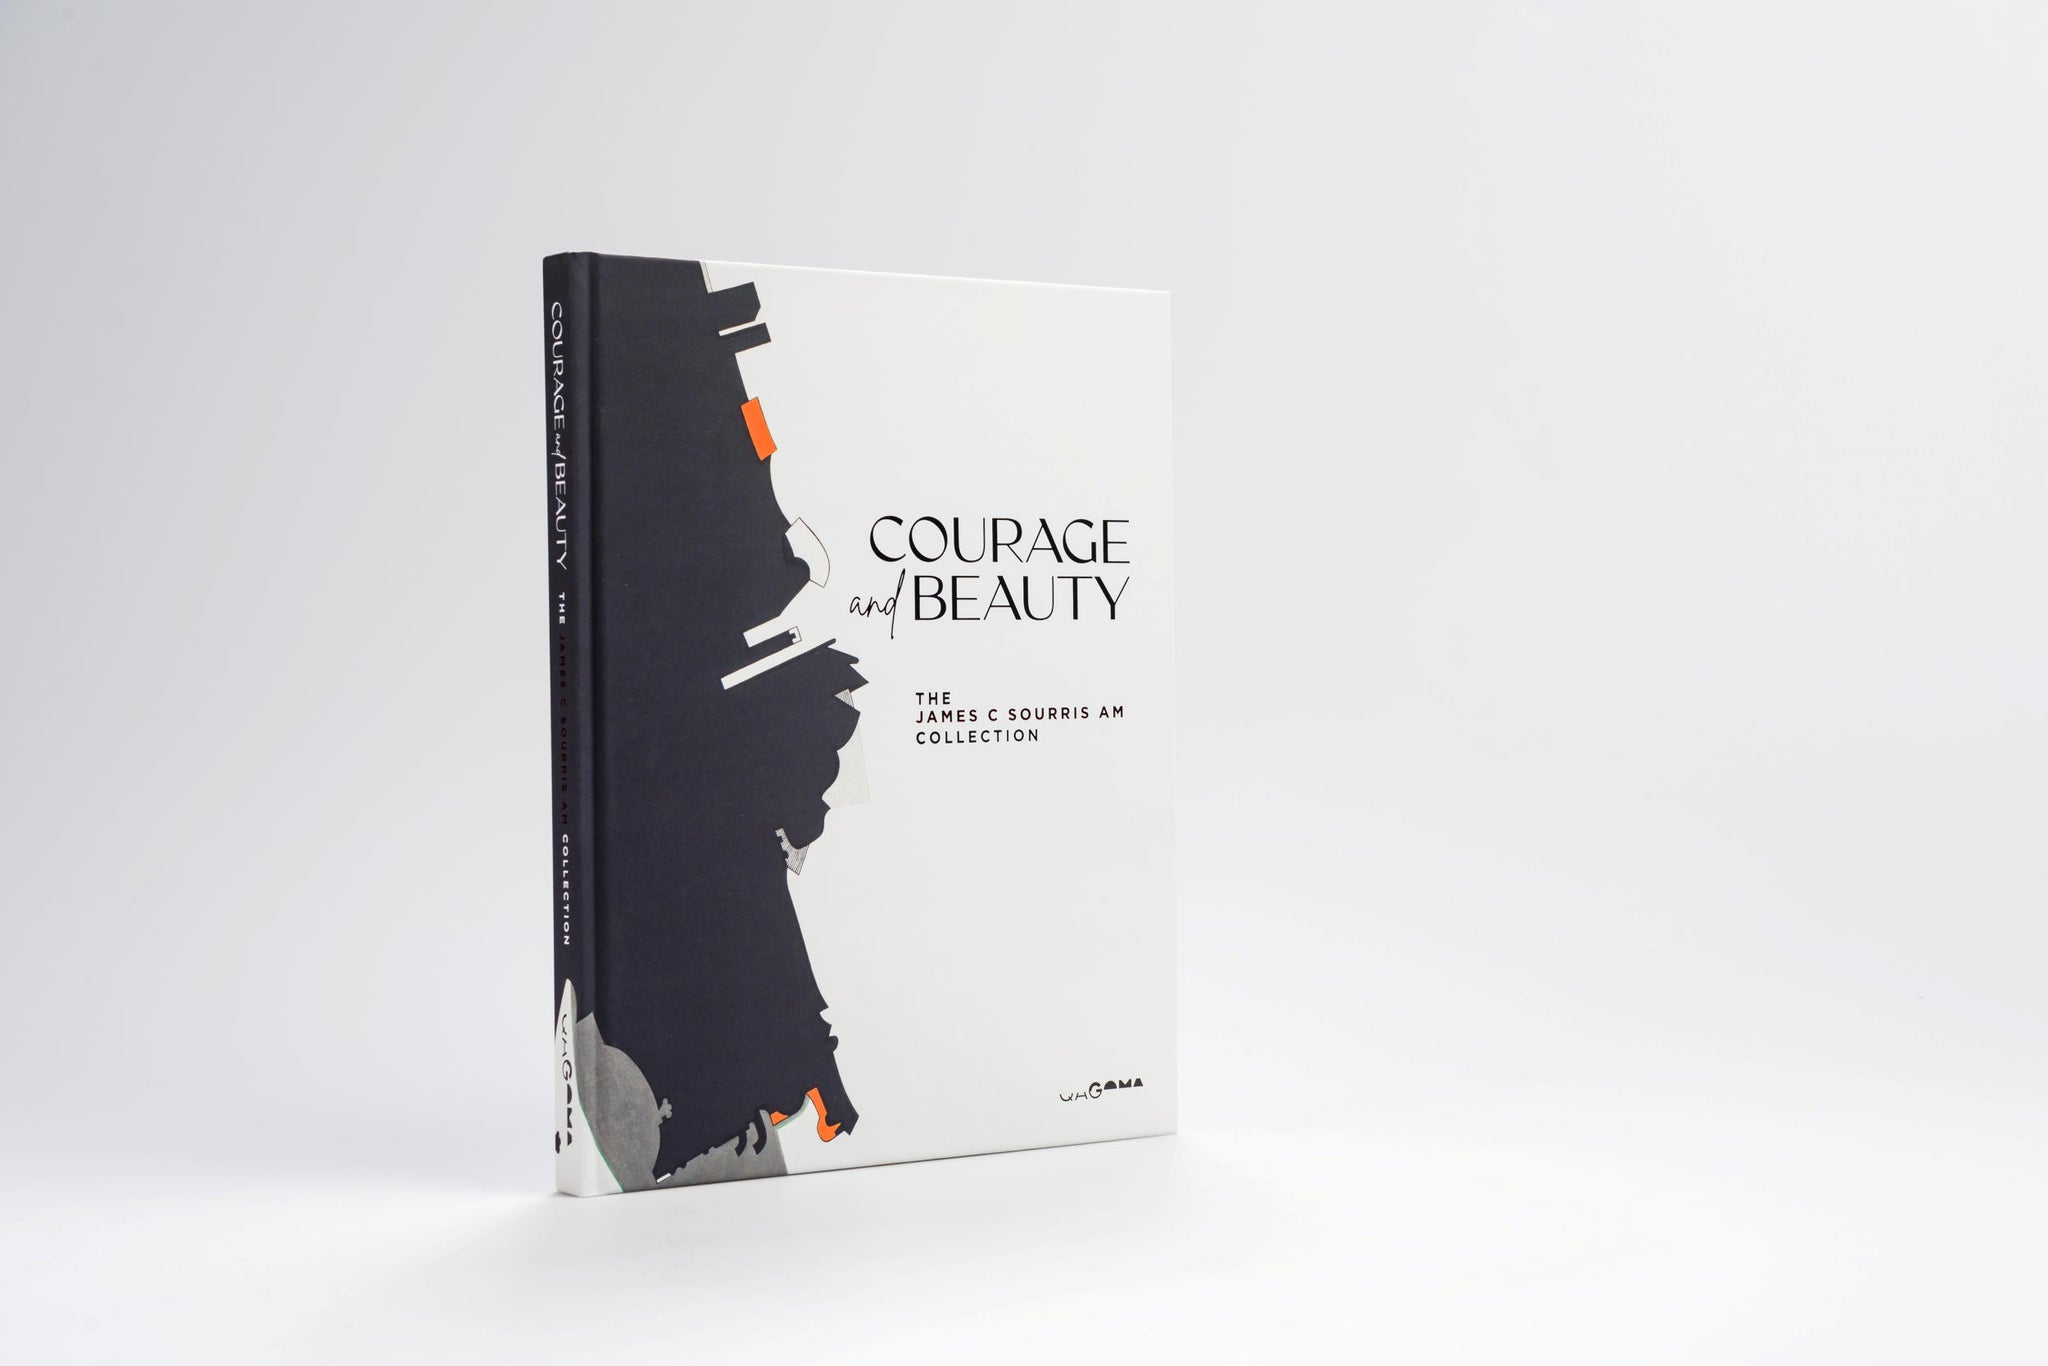 Courage & Beauty: The James C. Sourris AM Collection